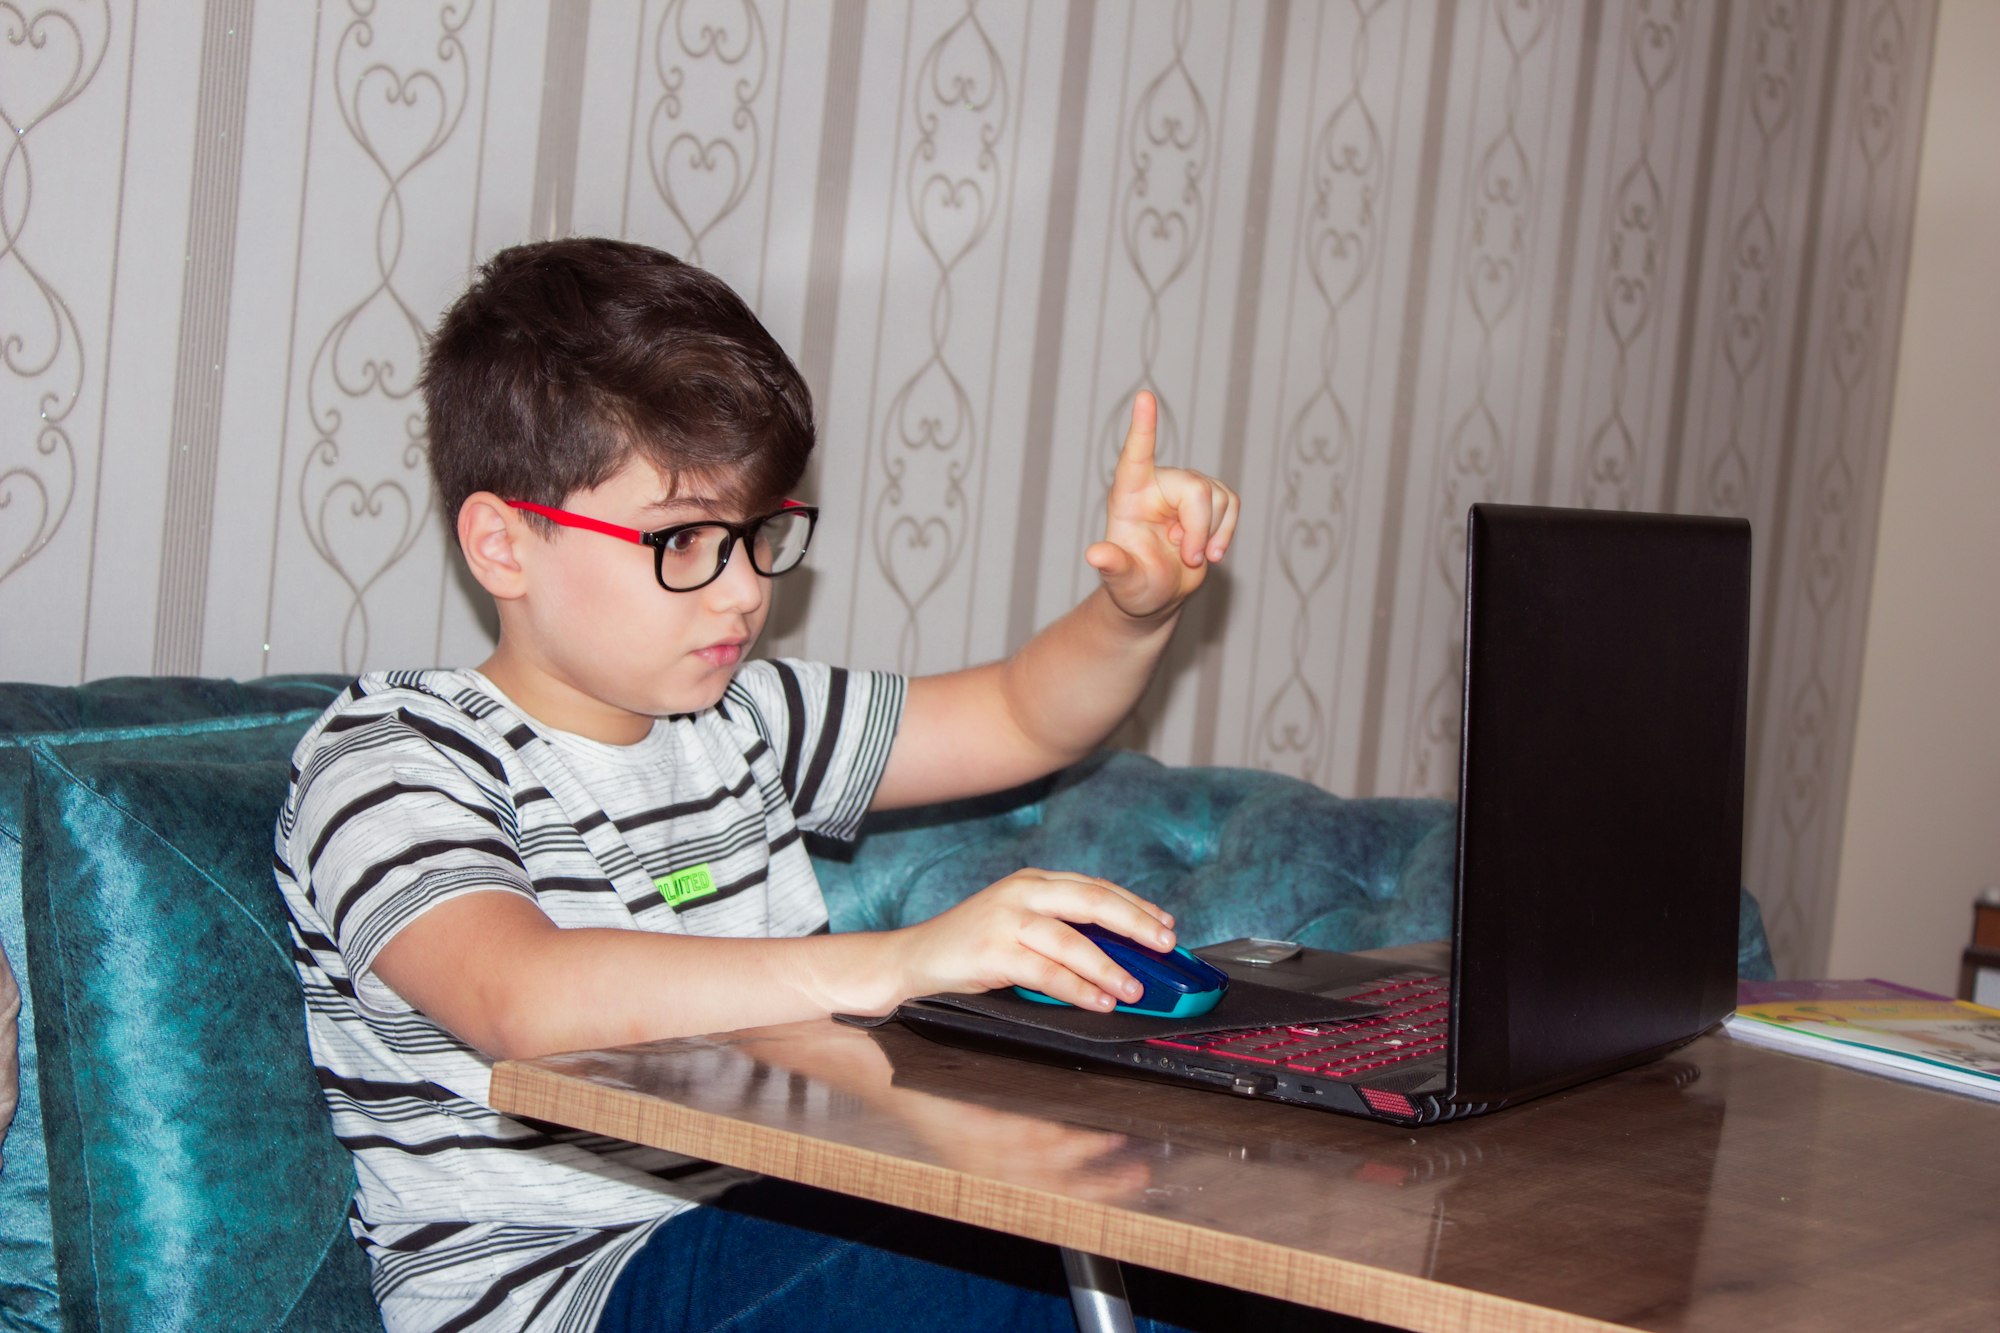 A child receives distance education via the Internet because of Covid 19